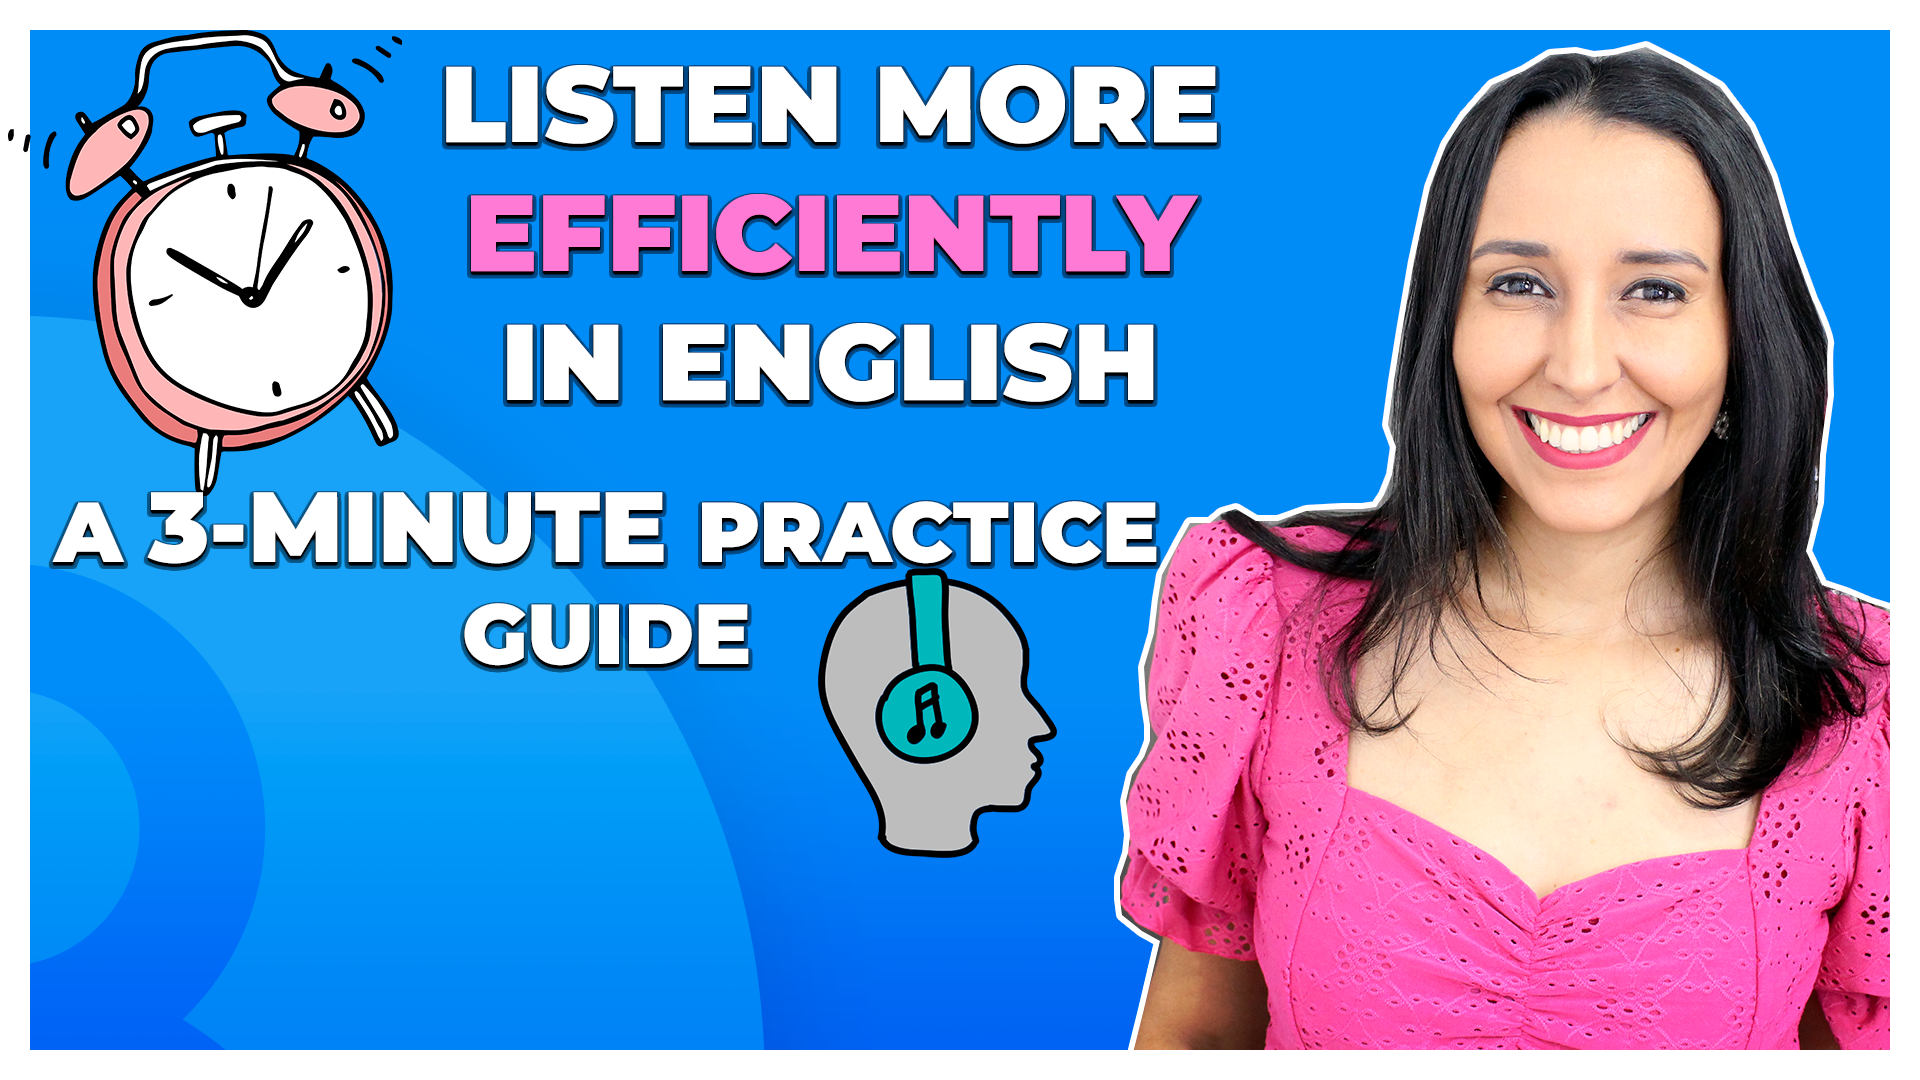 Can You Improve Your Listening With A 3-Minute Practice?